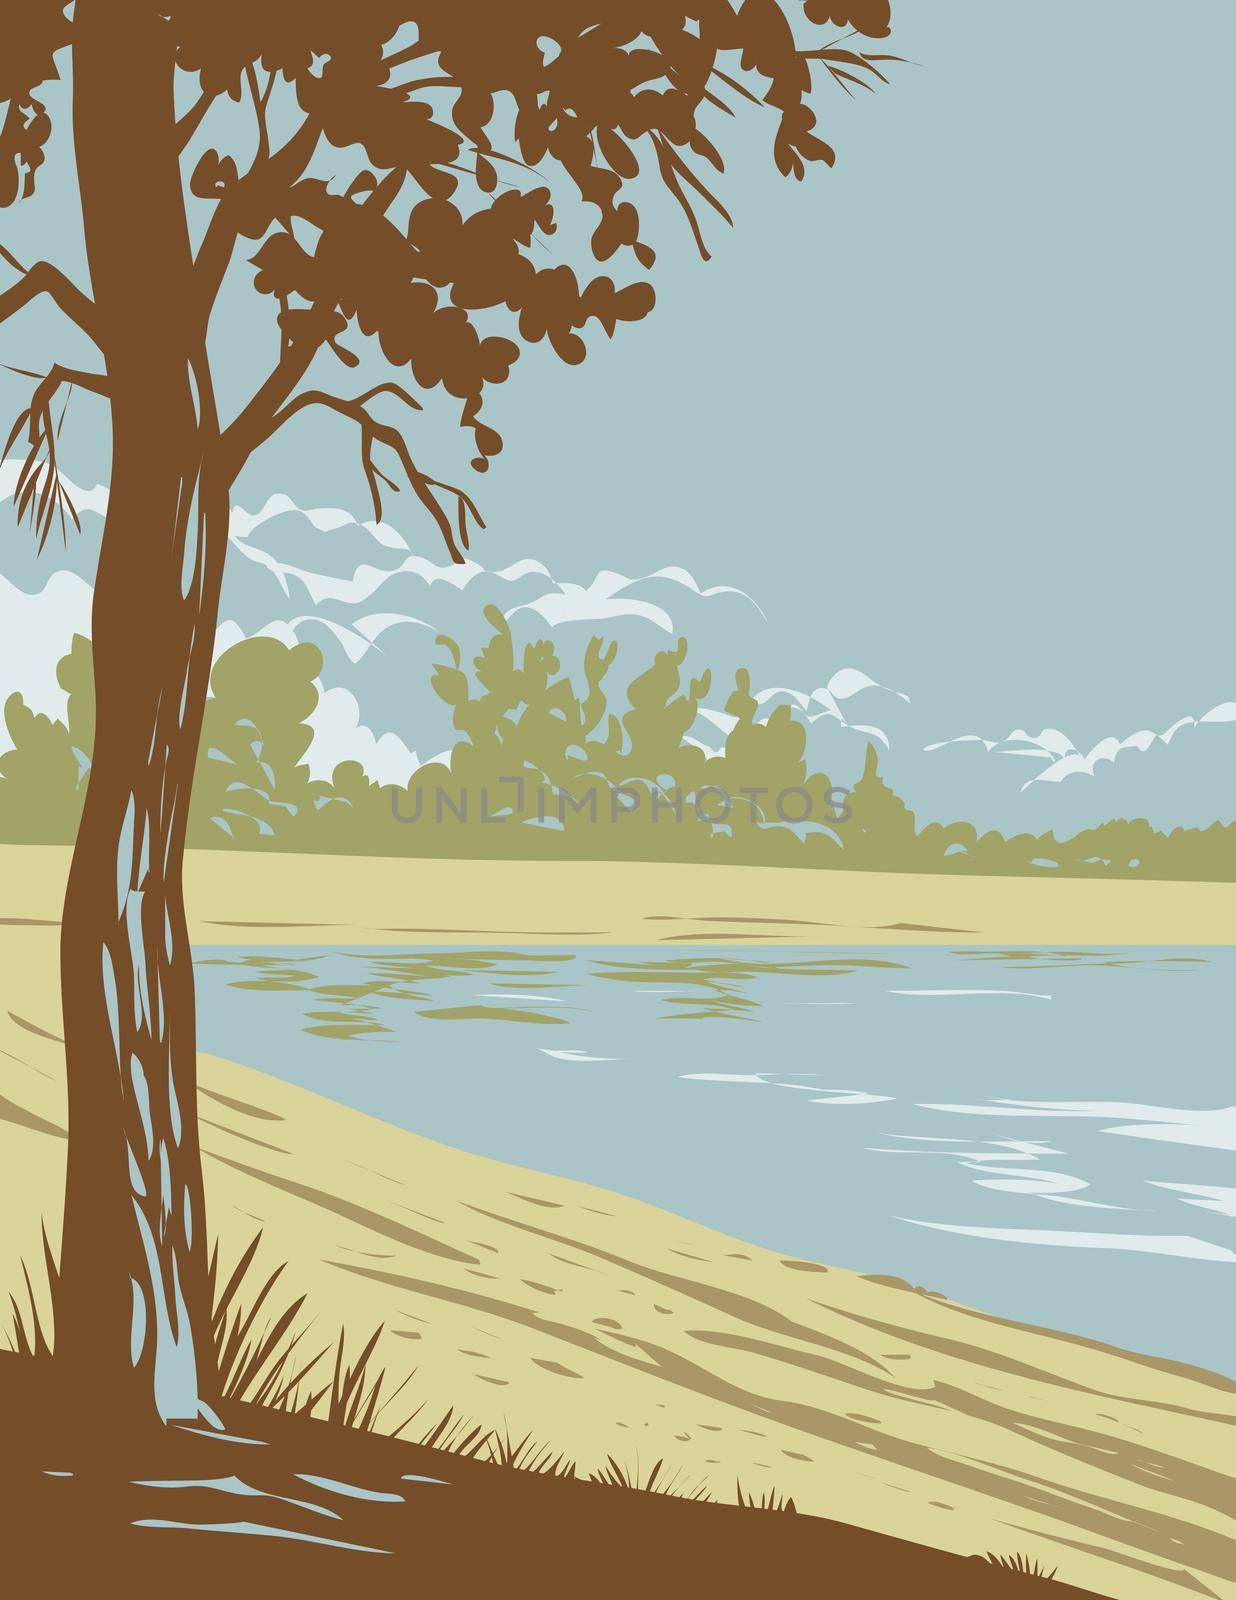 WPA poster art of Edness K. Wilkins State Park on the North Platte River located east of Casper in Natrona County, Wyoming, United States of America USA done in works project administration style.
